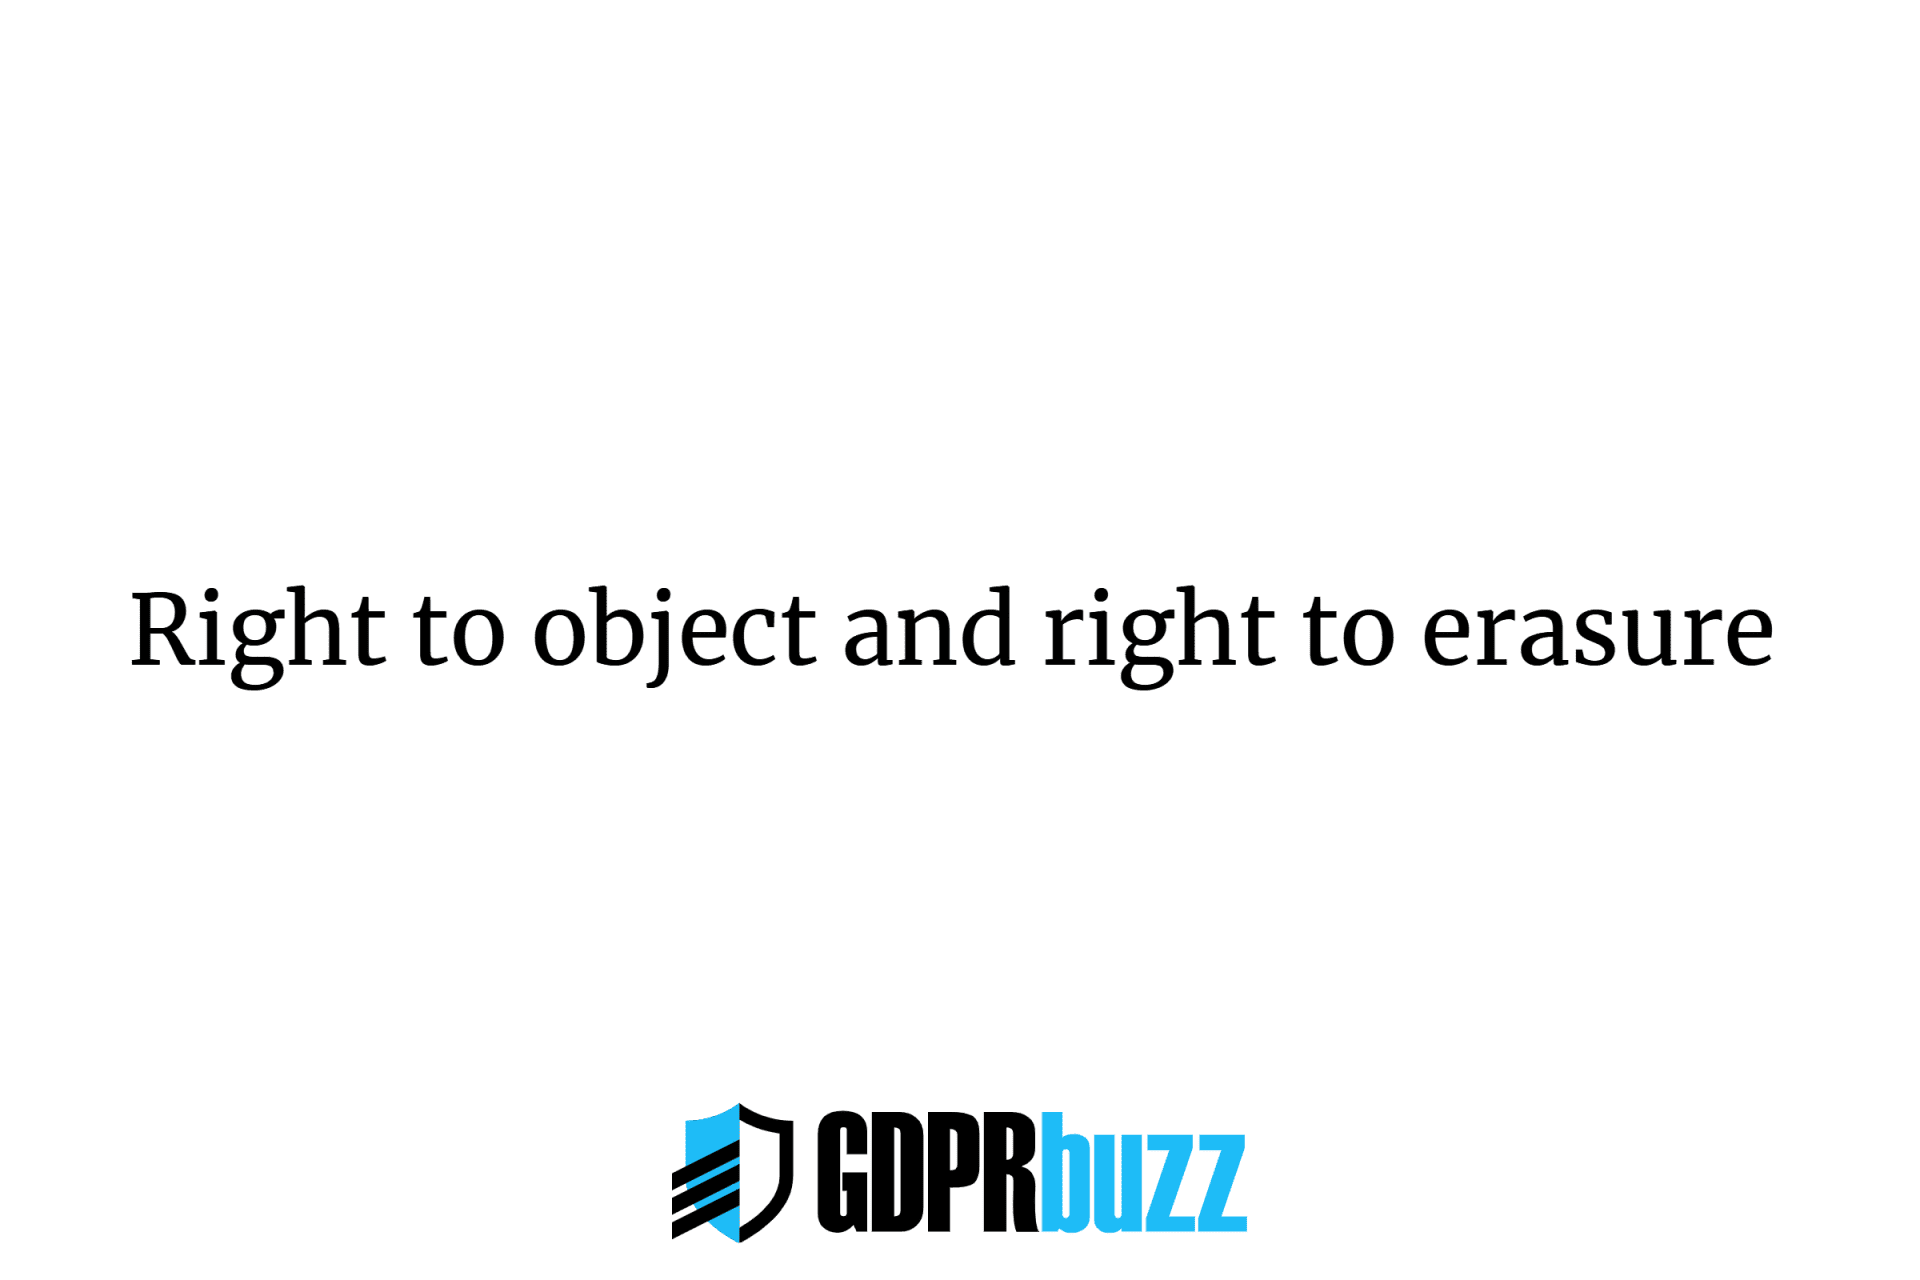 Right to object and right to erasure